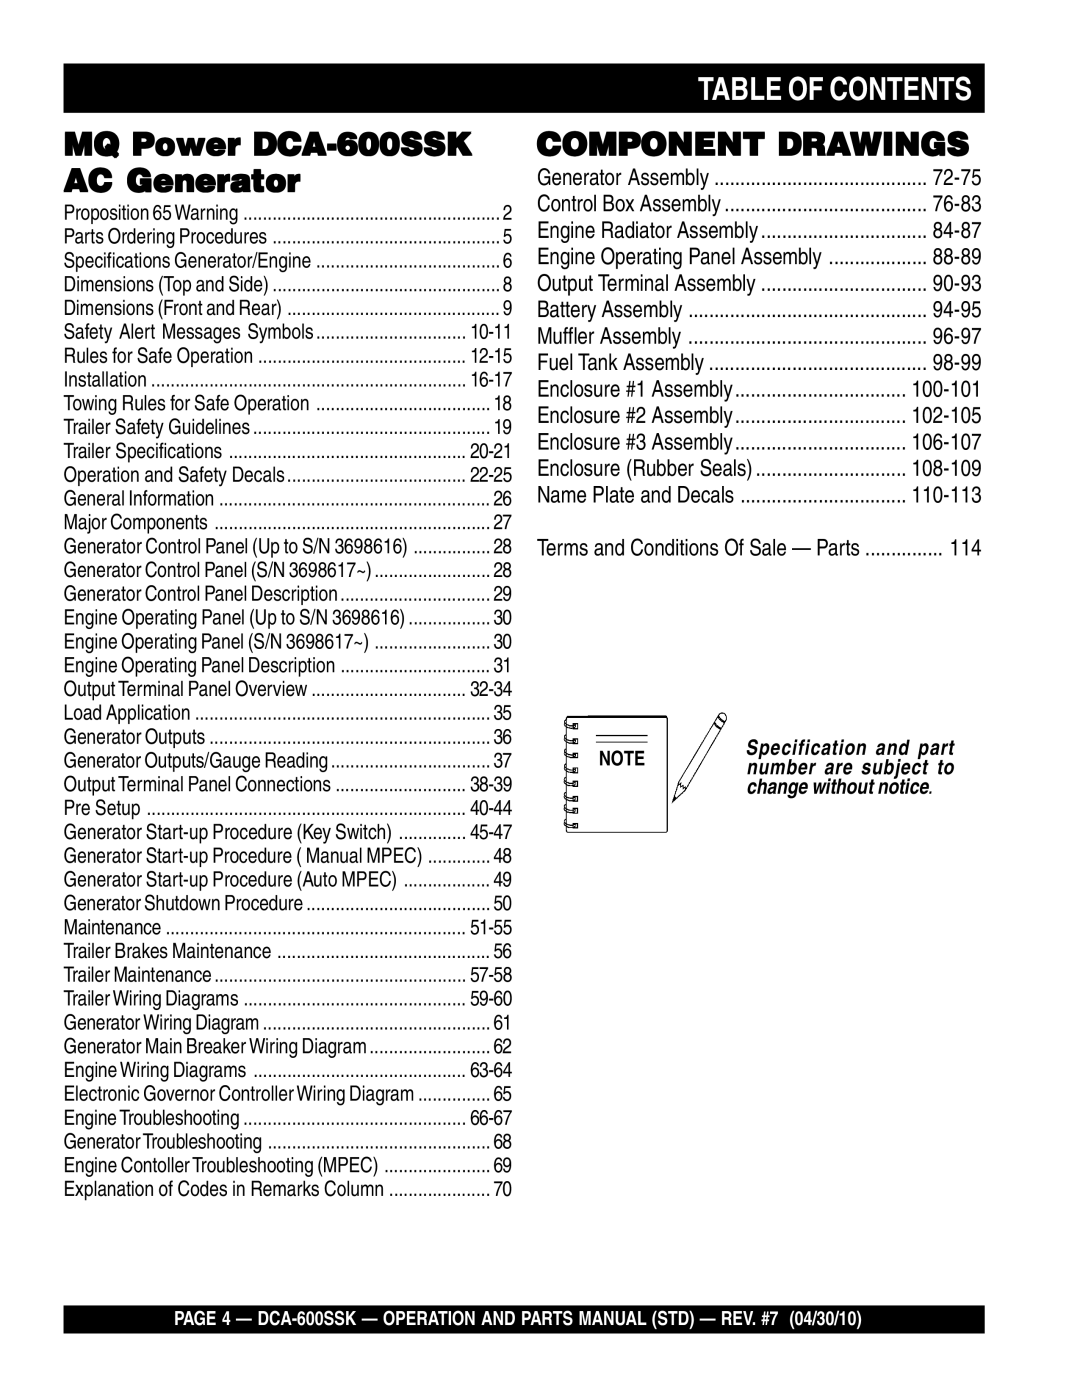 Multiquip MQ Power DCA-600SSK AC Generator, Table Of Contents, Component Drawings, 72-75, 76-83, 84-87, 88-89, 90-93 